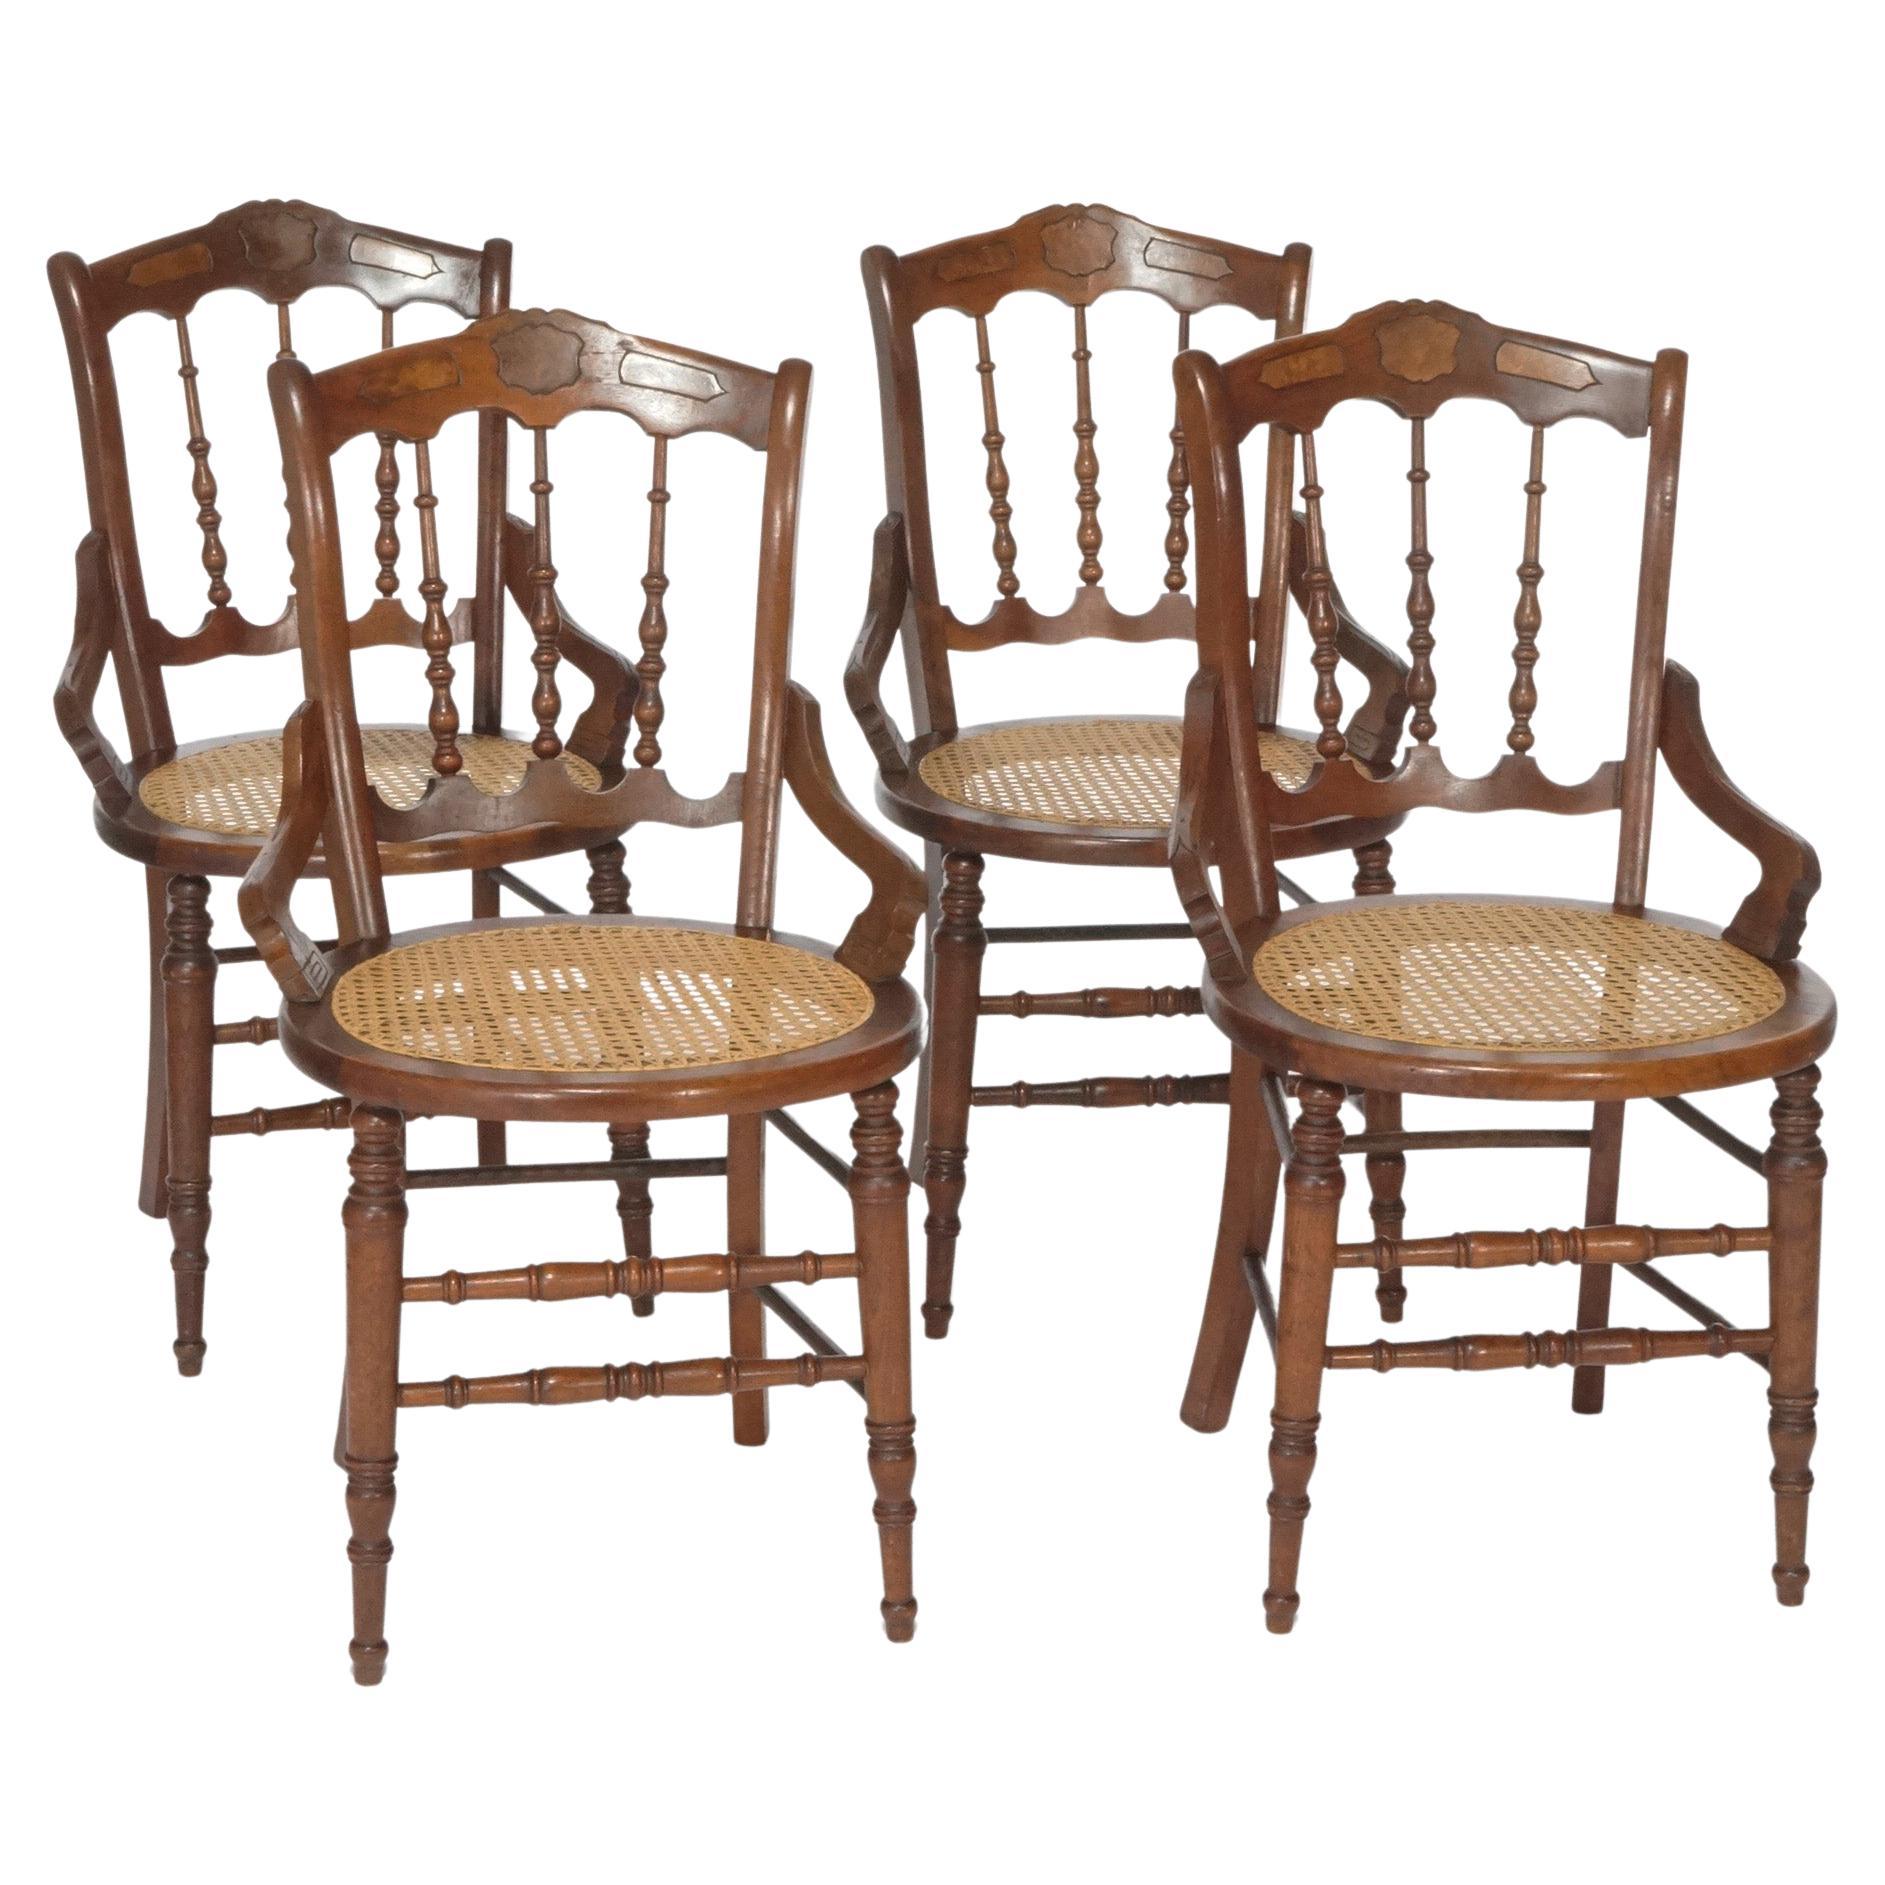 Antique Set of Four Victorian Walnut & Pressed Cane Dining Chairs, Circa 1890